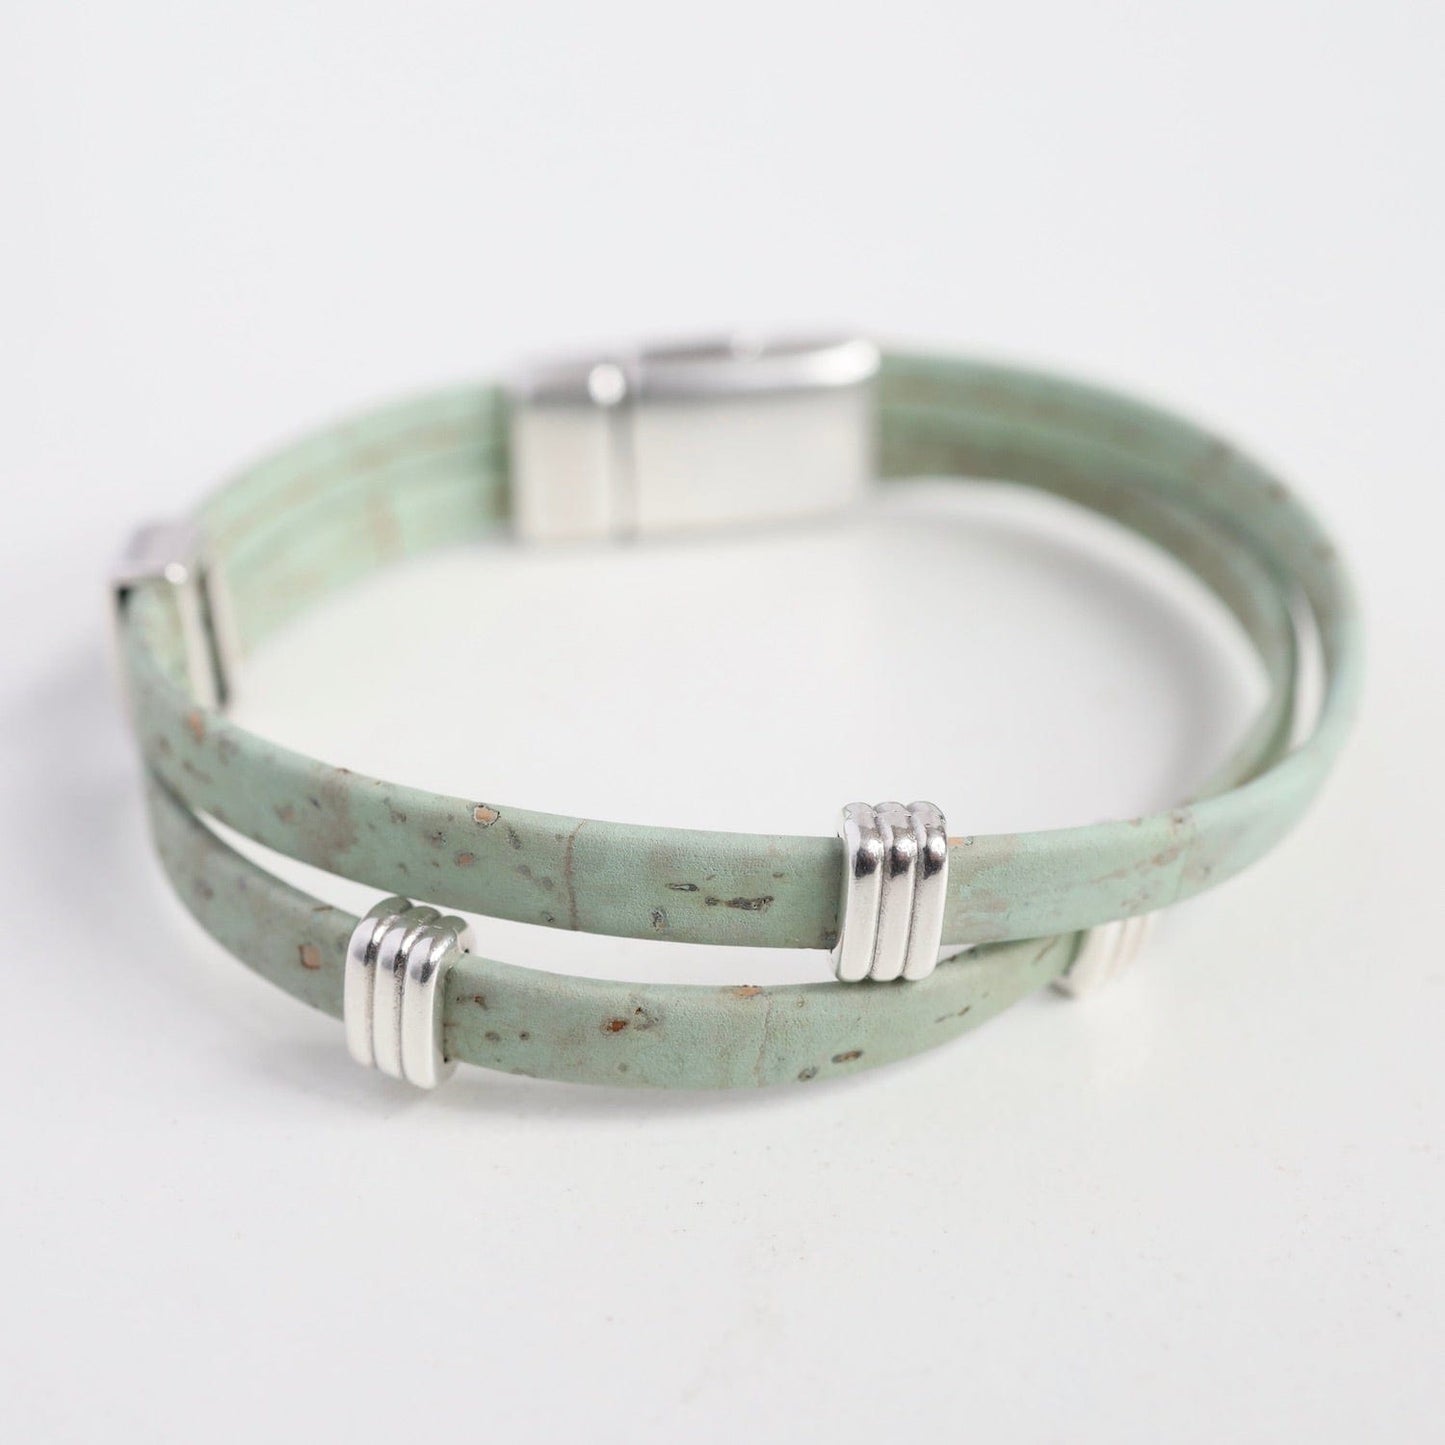 BRC Classic Cork Bracelet With Striped Bands - Mint Green